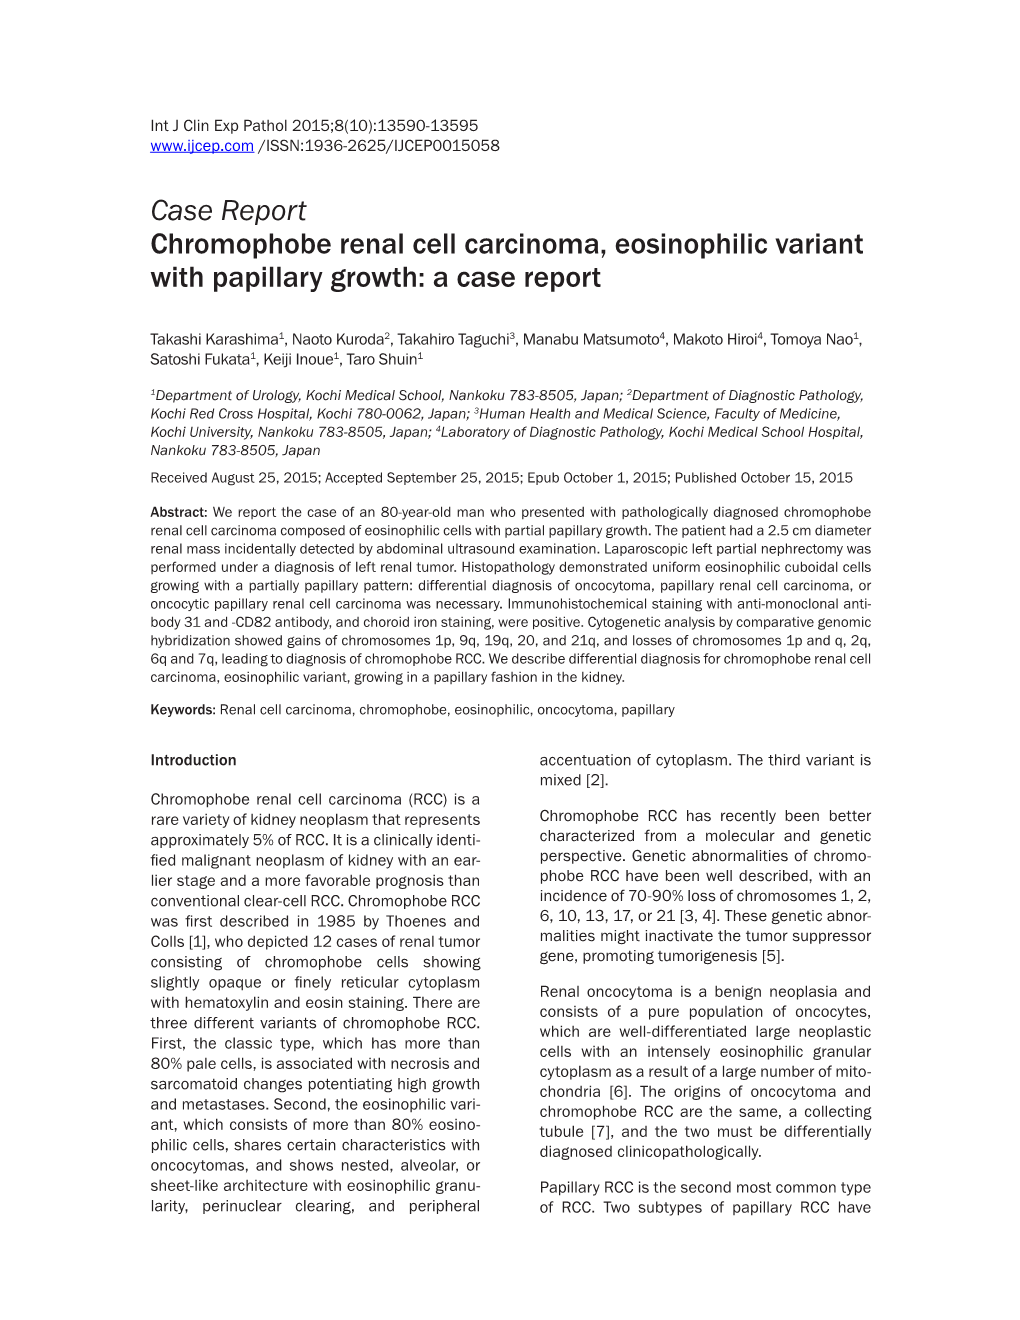 Case Report Chromophobe Renal Cell Carcinoma, Eosinophilic Variant with Papillary Growth: a Case Report